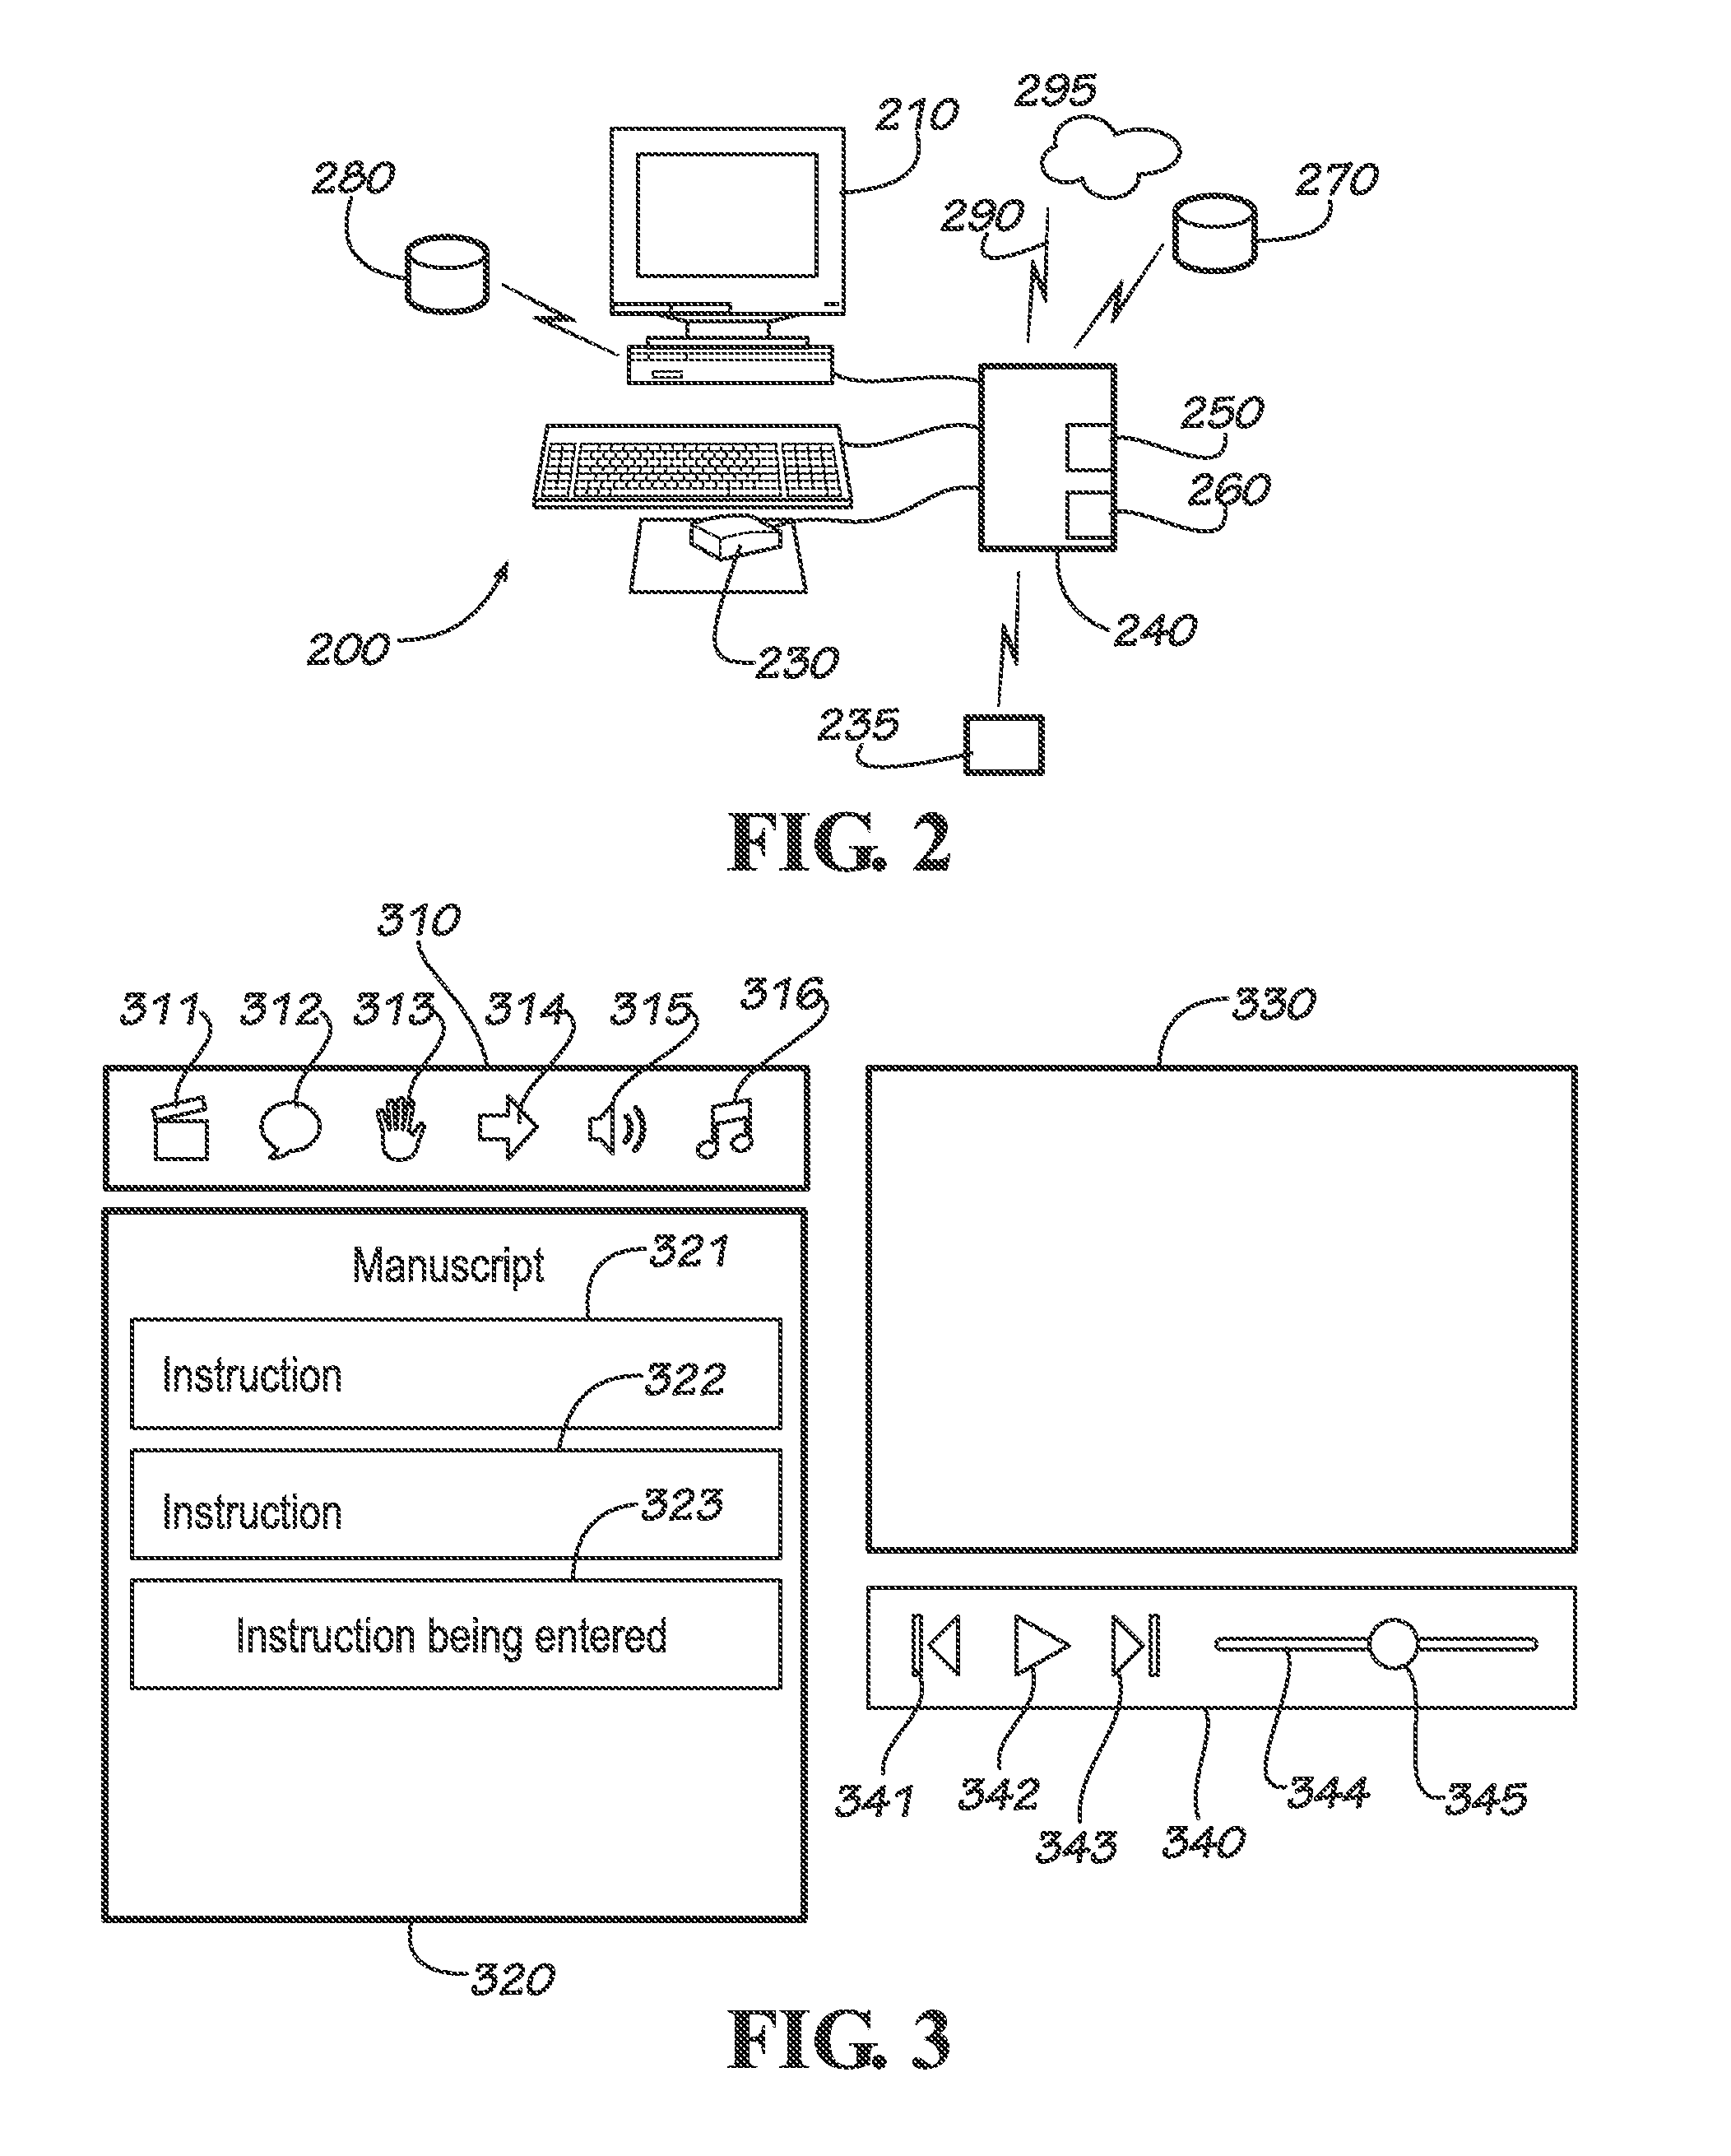 System, apparatus and method for the creation and visualization of a manuscript from text and/or other media